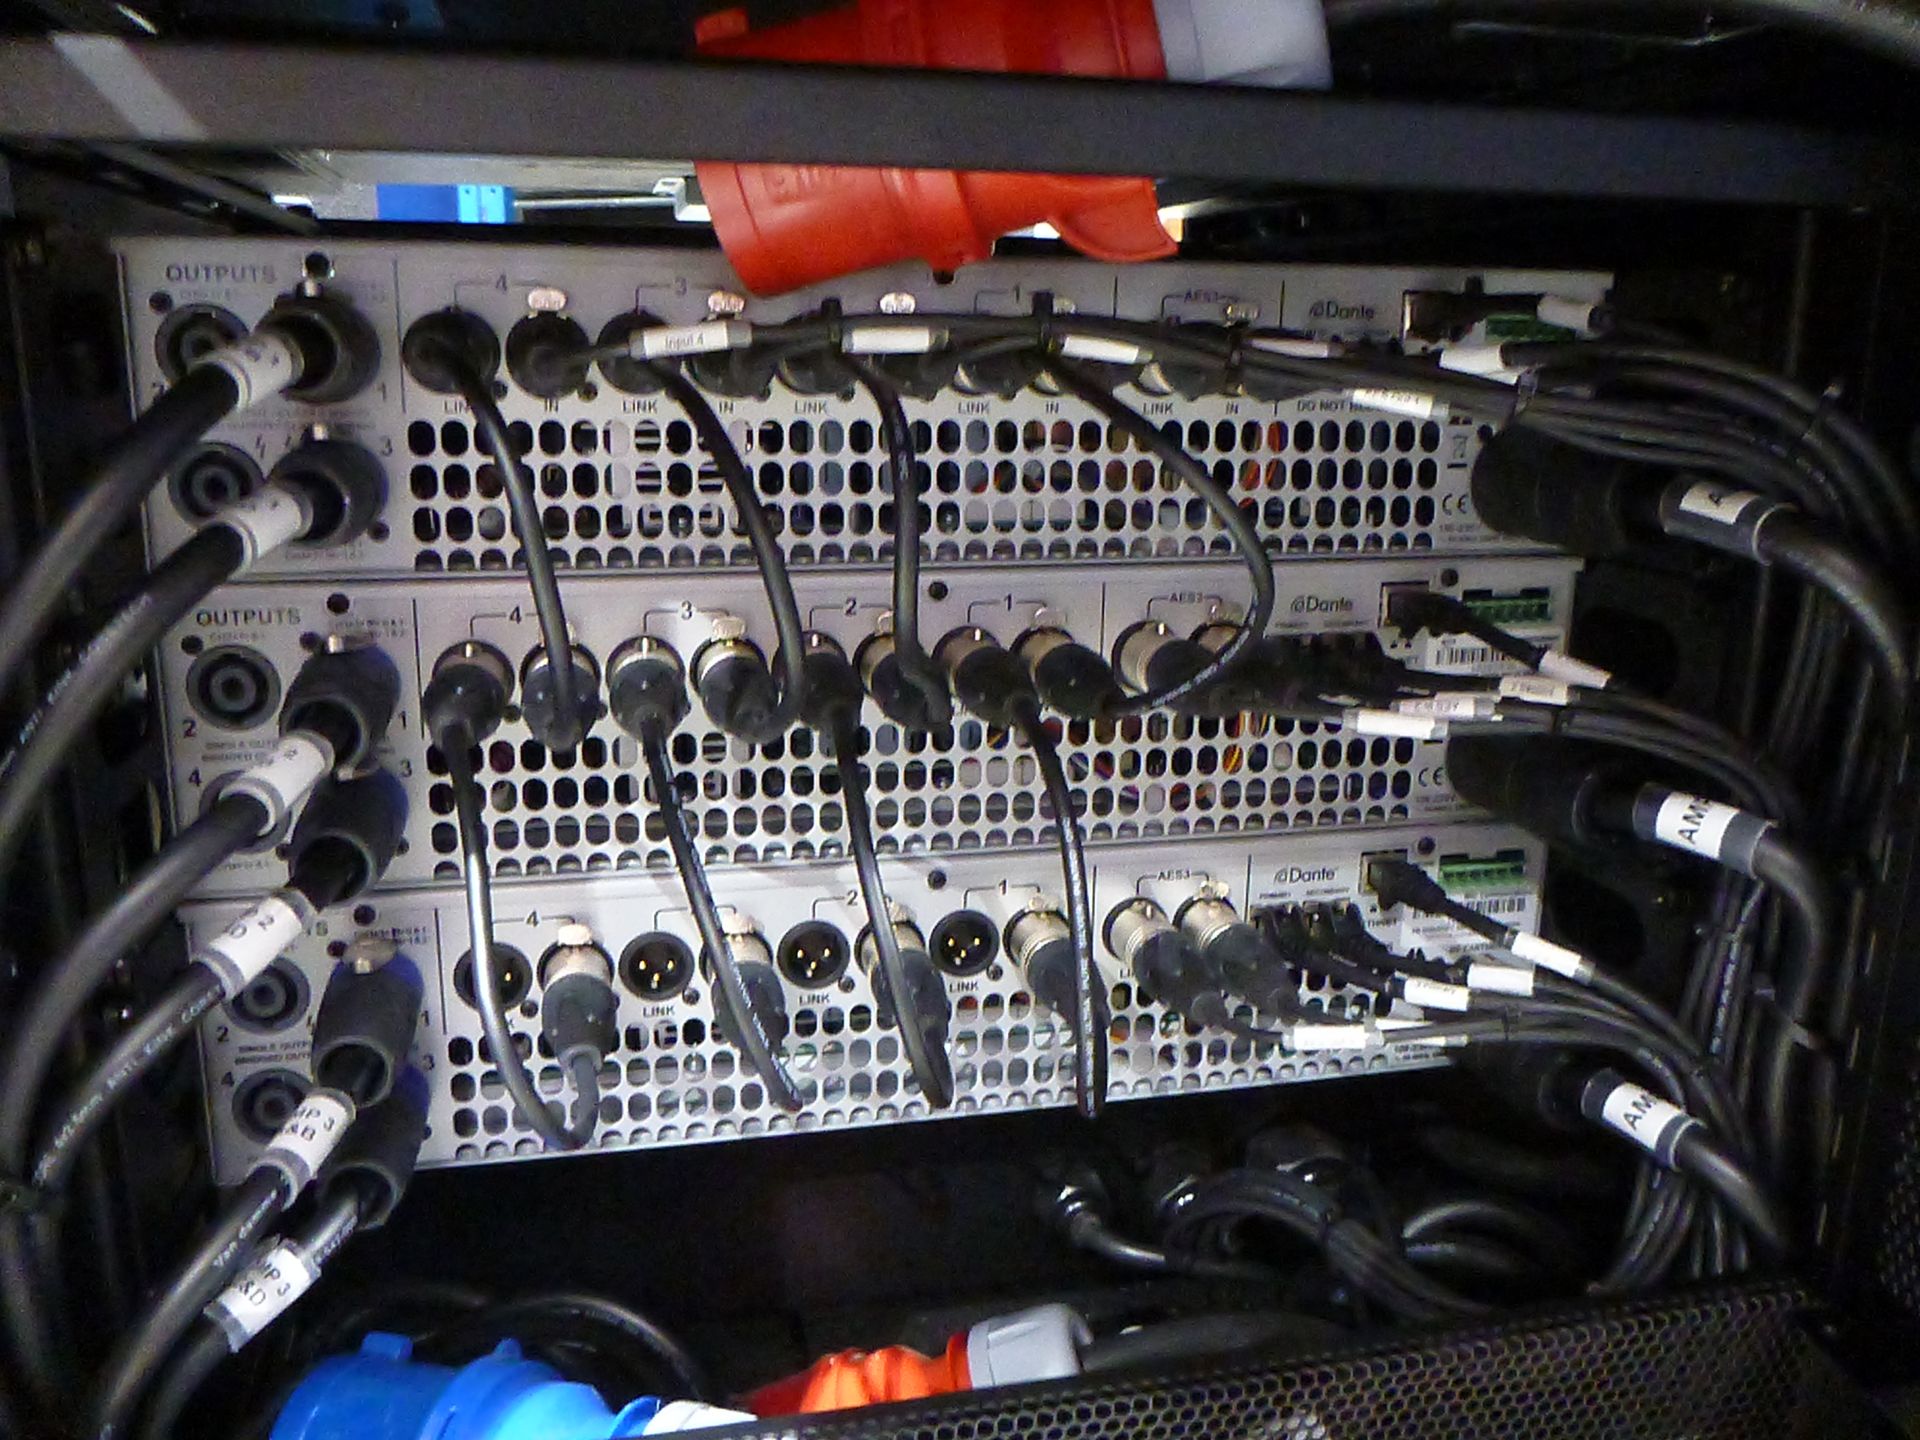 EM Acoustics DQ Rack Touring Amplifier Rack, To include 3 off DQ20 4 (12) Chnl power amplifiers, 1 - Image 8 of 11